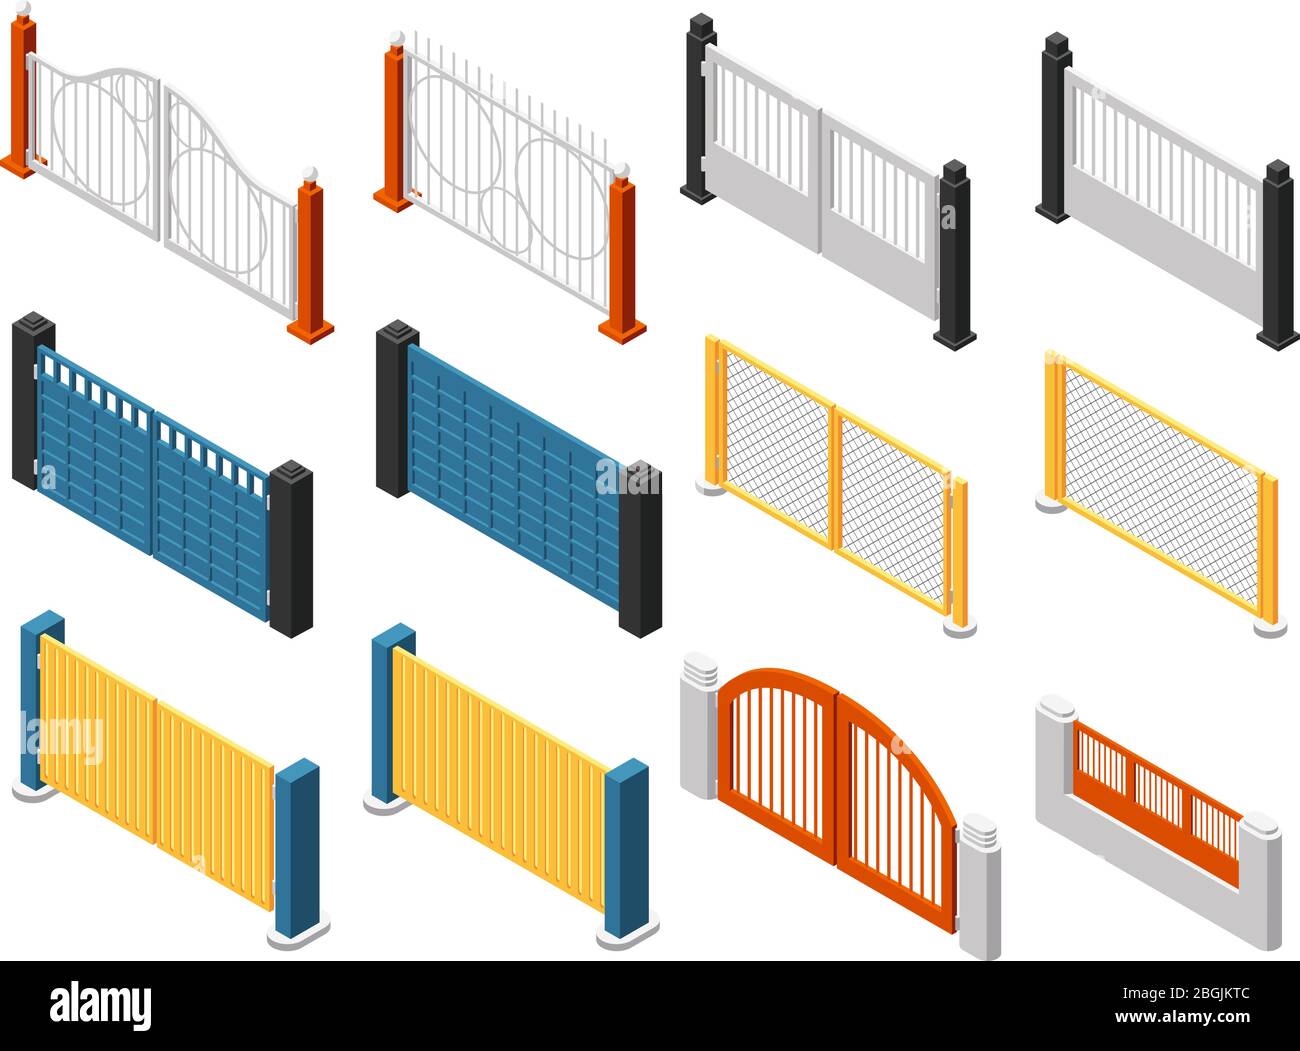 Isometric fences. Wooden fence, garden railing. Isolated 3d vector set. Railing fence border, architecture exterior wall protection illustration Stock Vector